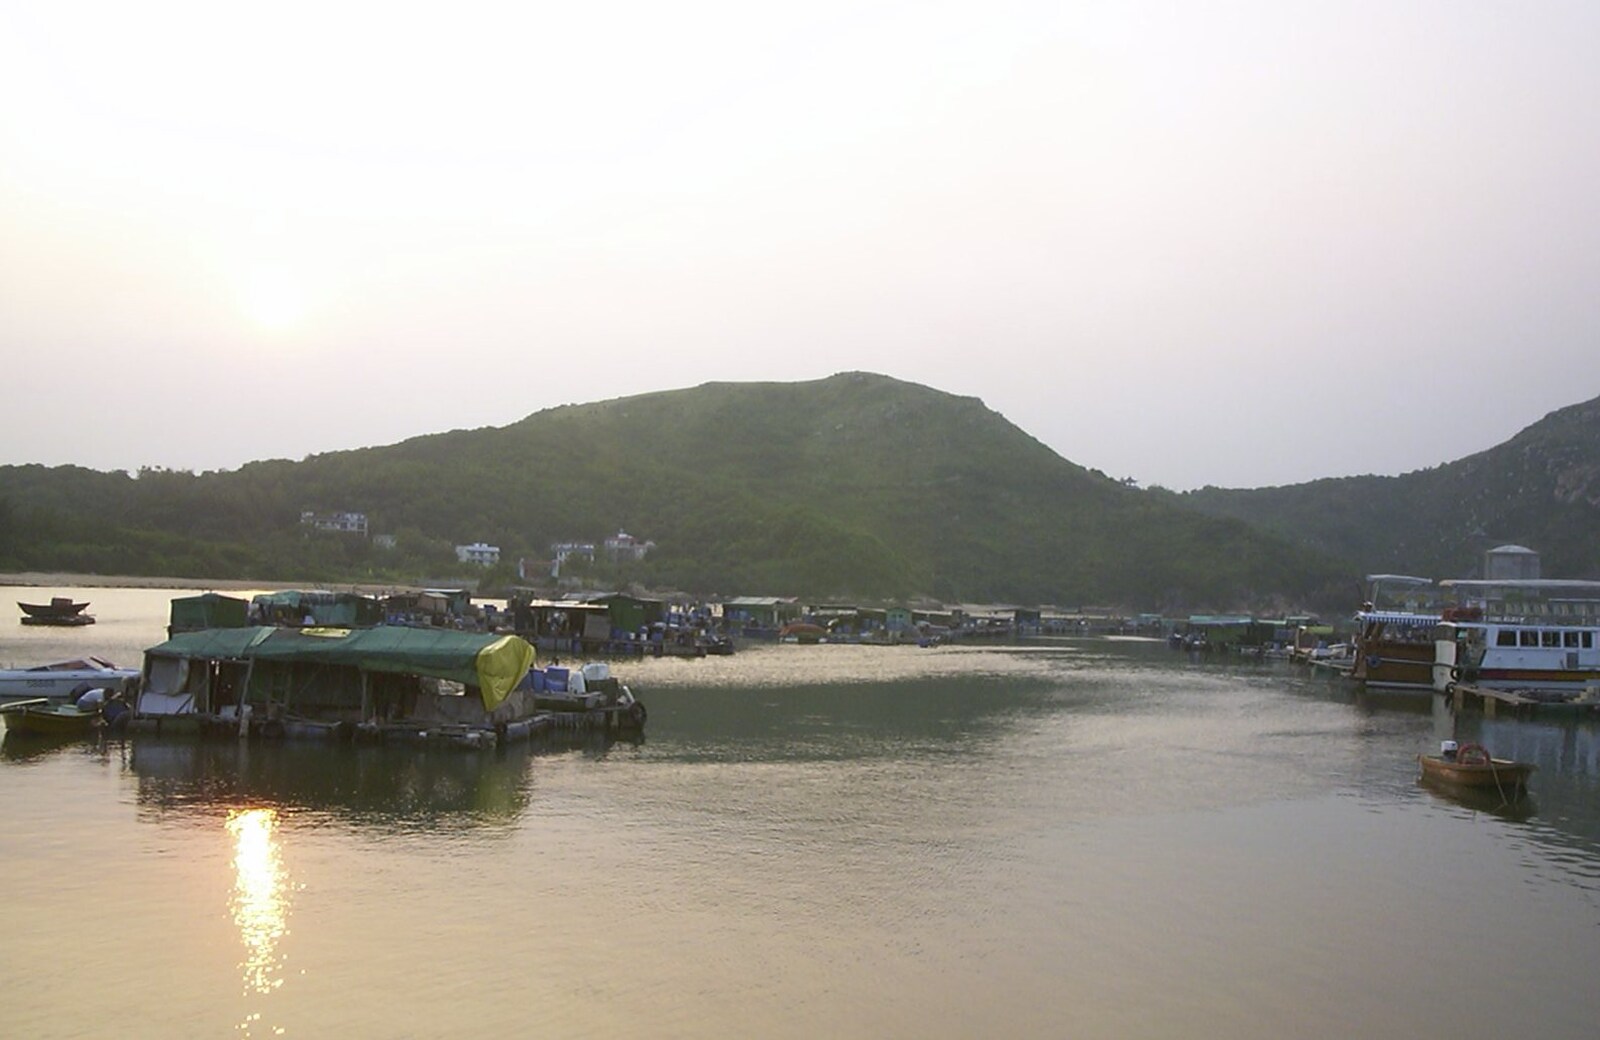 Lamma Island, Hong Kong, China - 20th August 2001: A view of the floating village